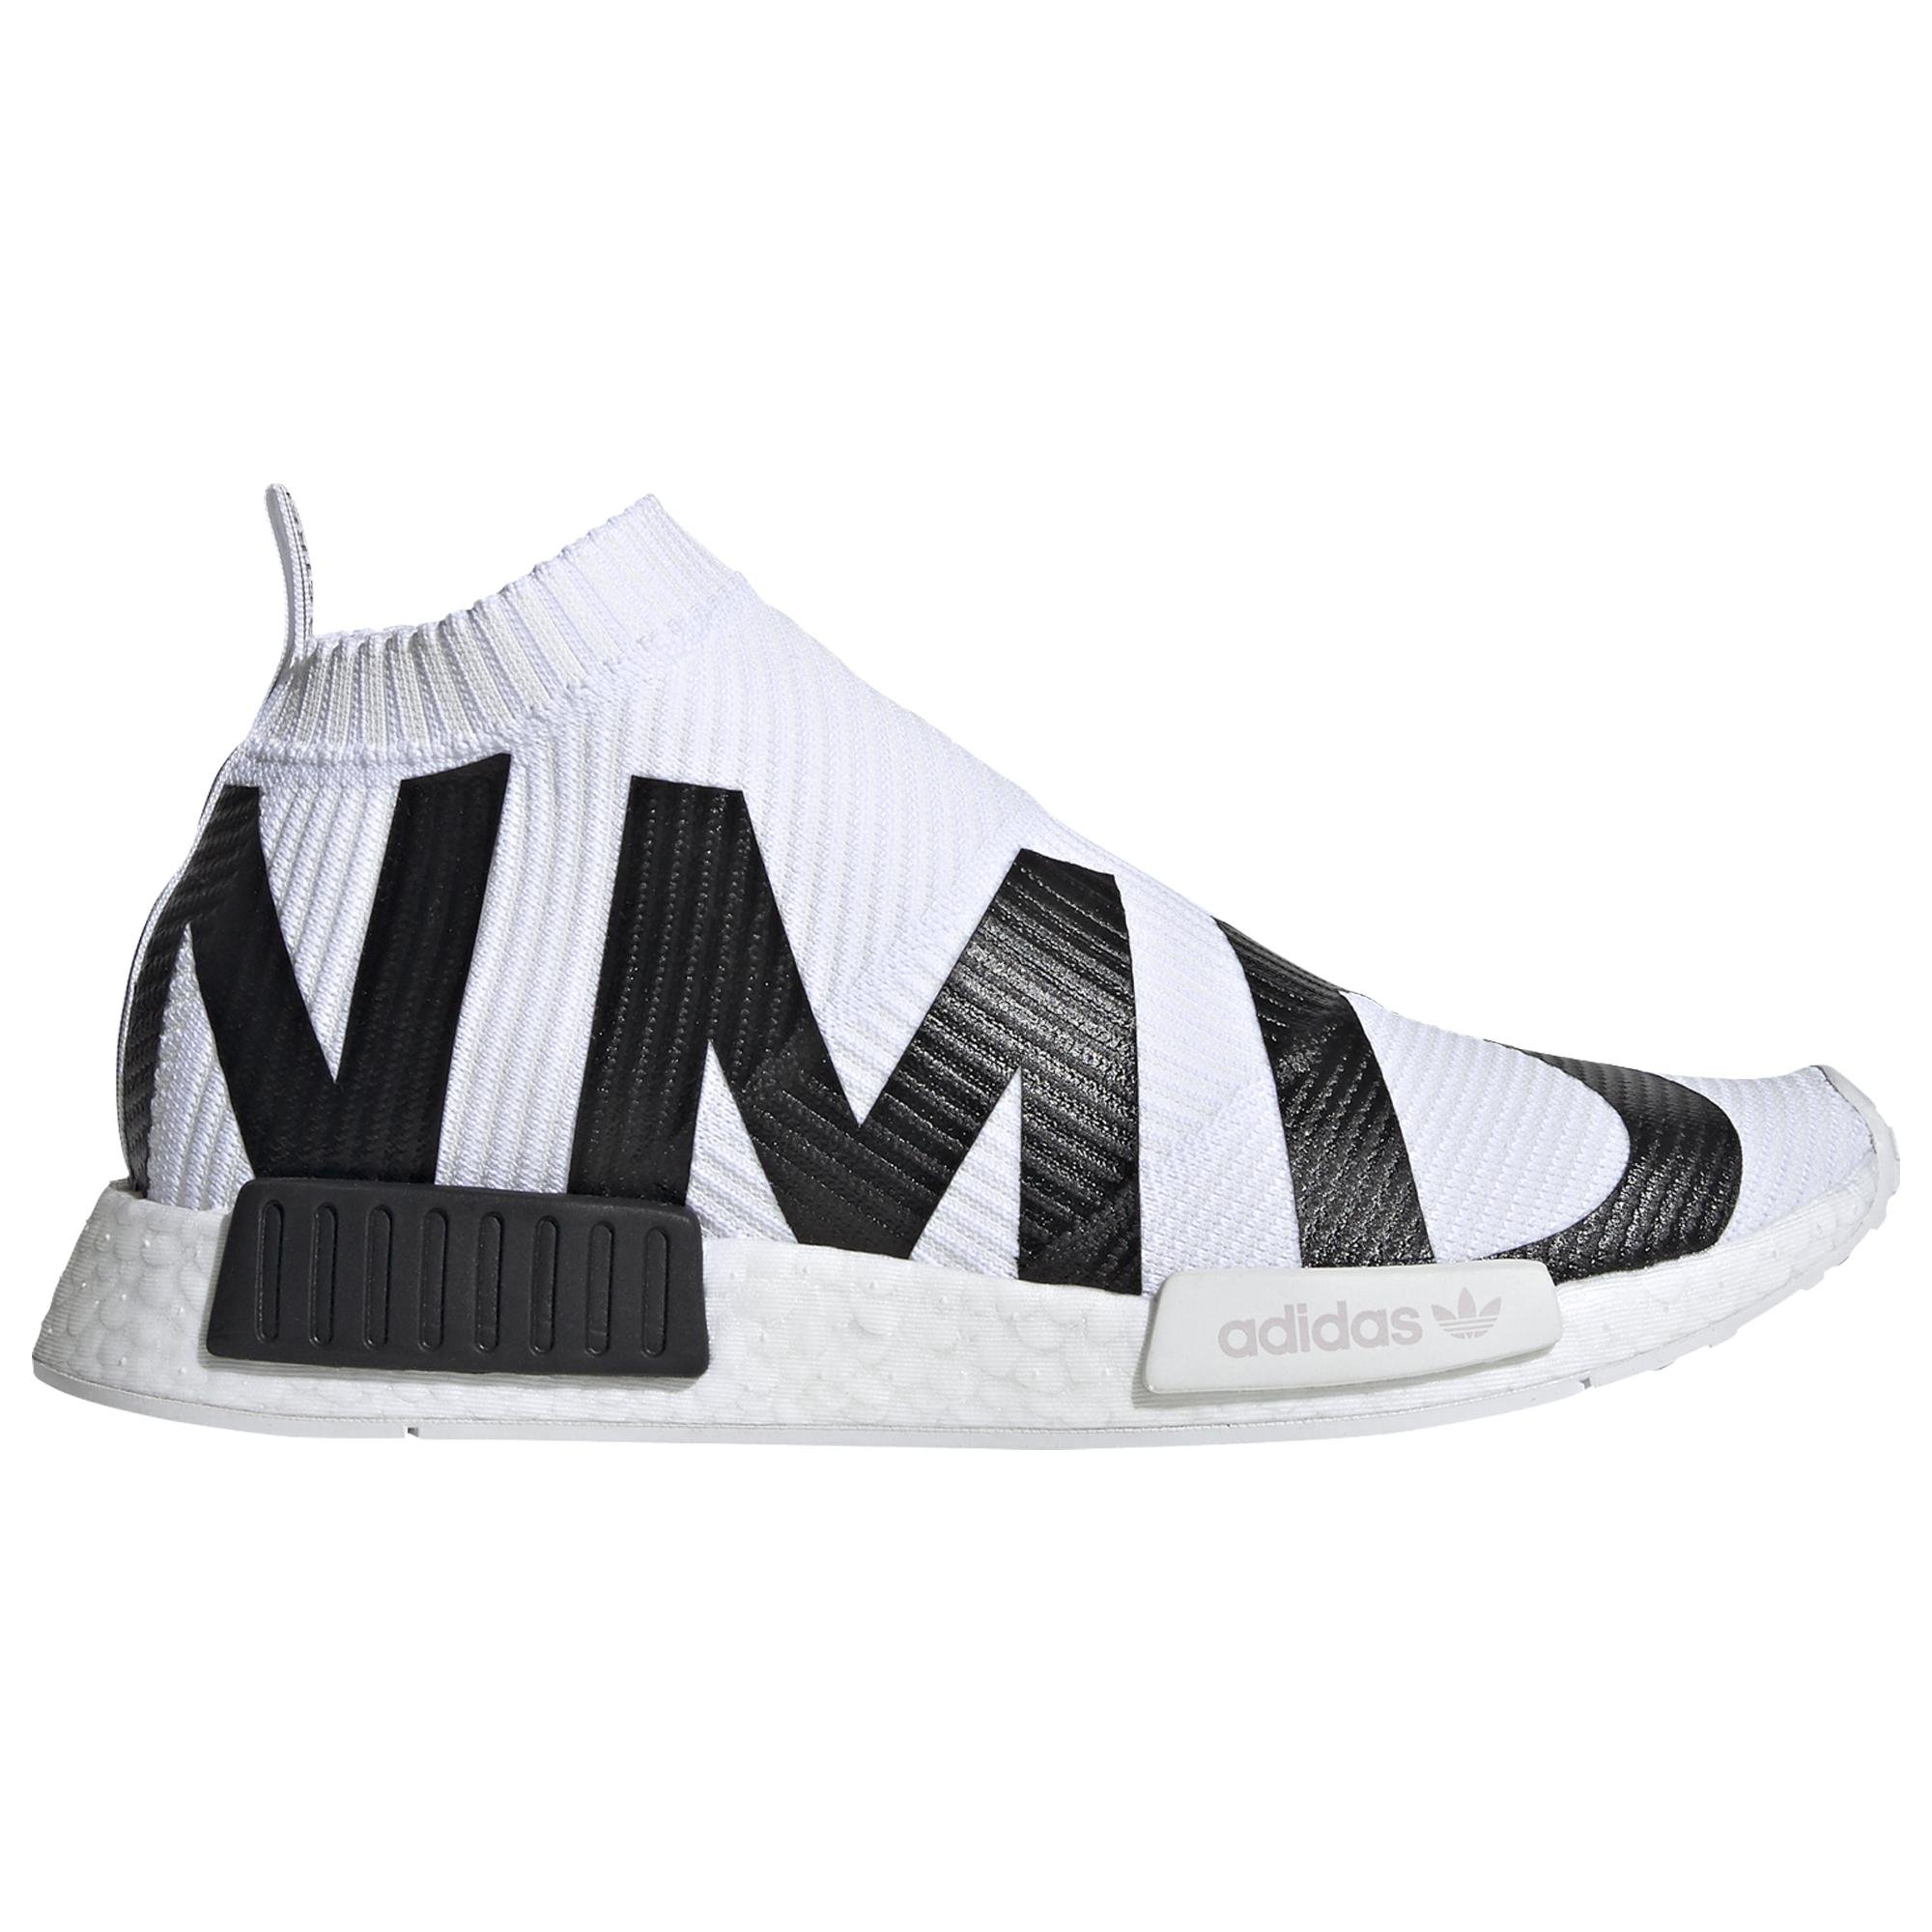 nmd with sock